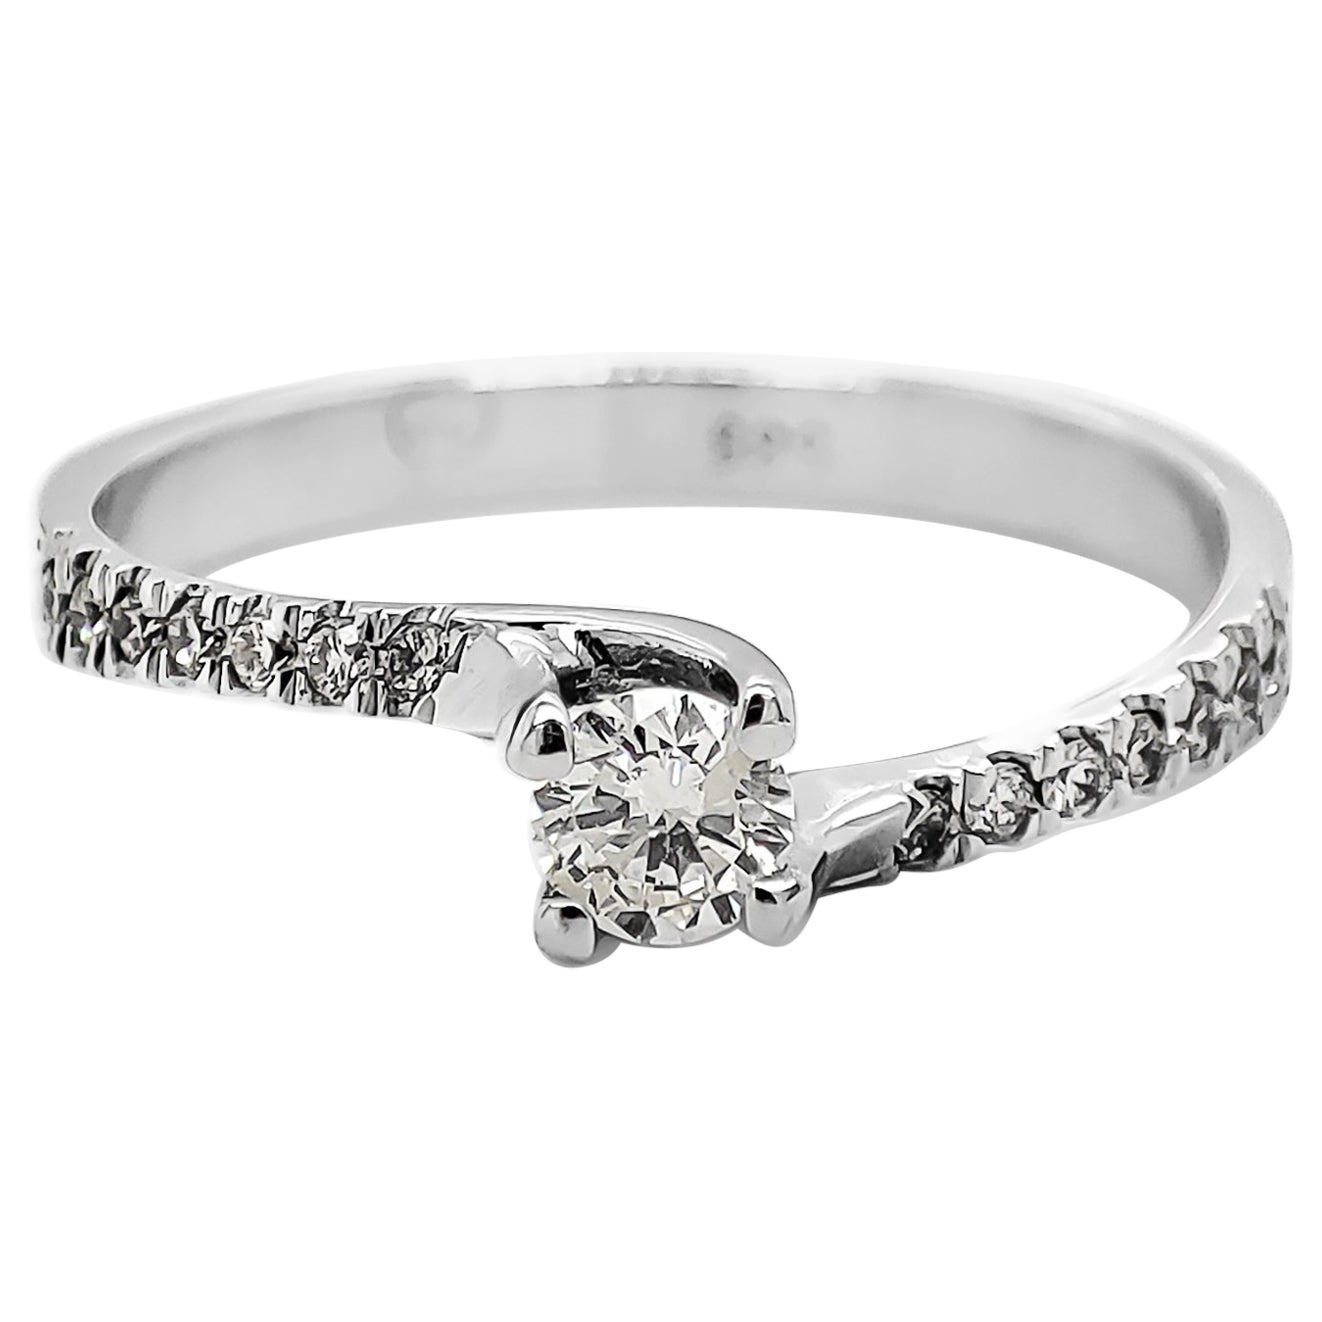 NO RESERVE 0.35CTW Engagement Diamond Ring 14K White Gold For Sale